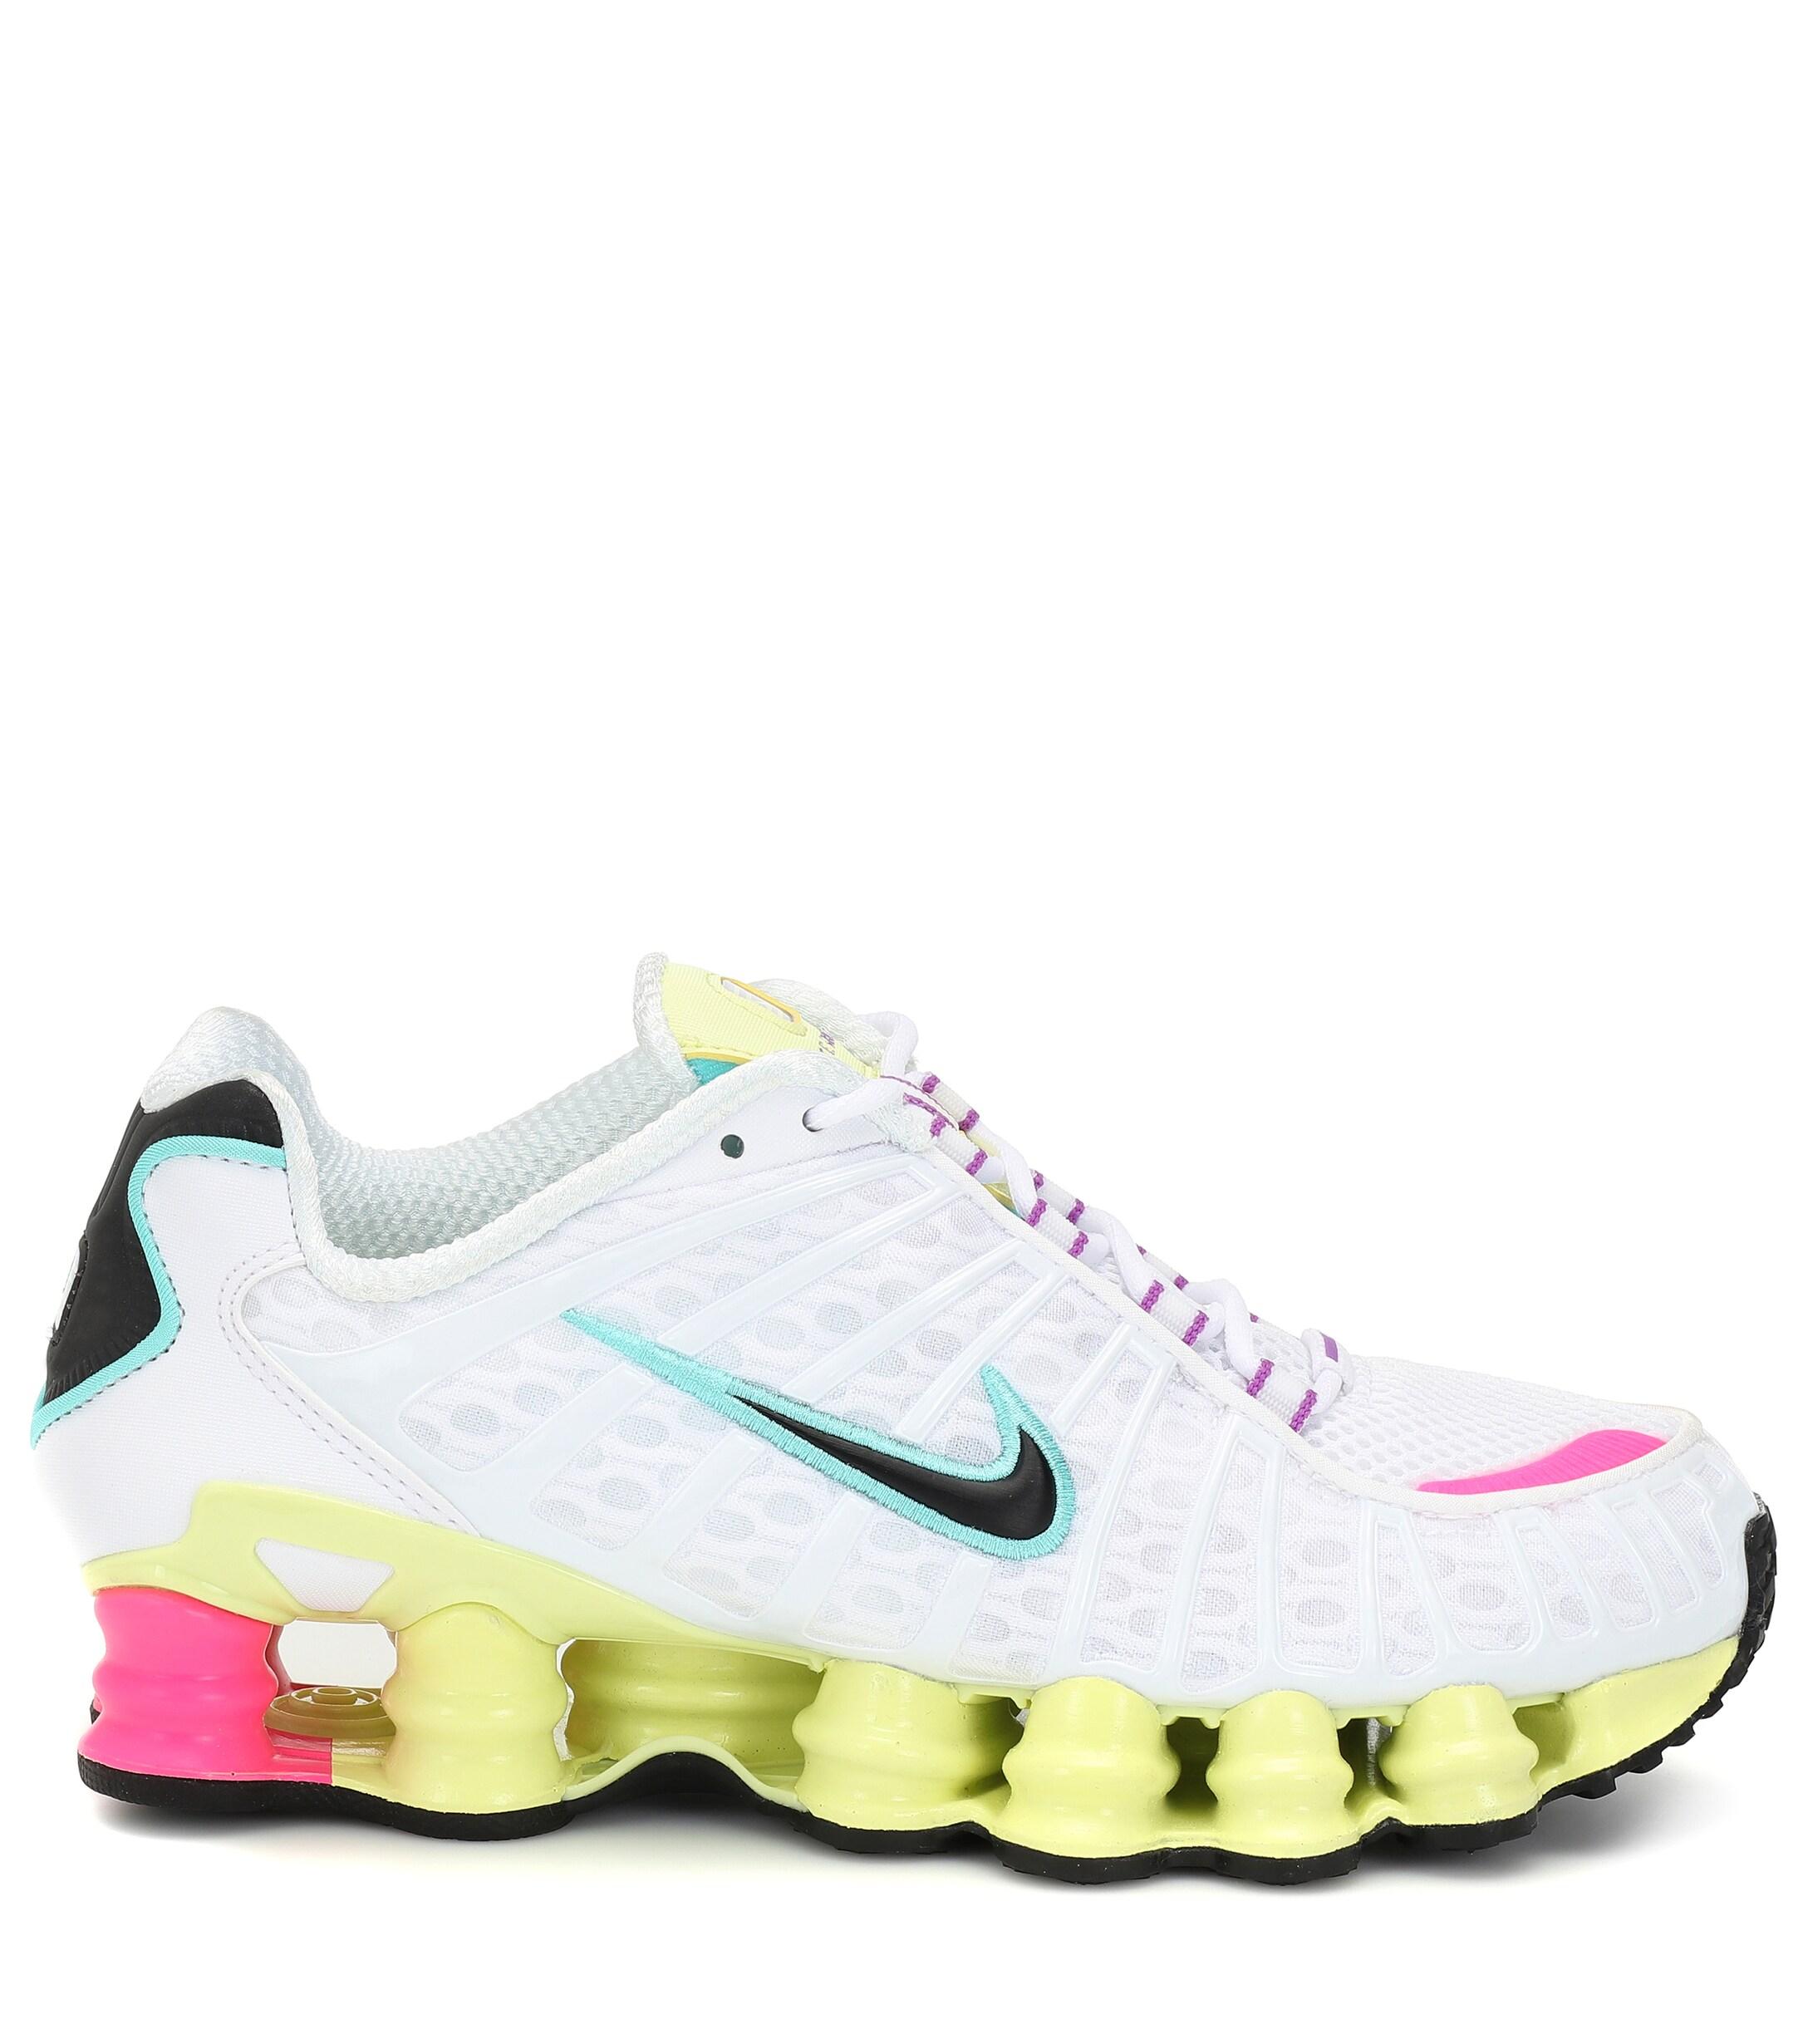 Nike Shox Tl Trainers in White/Yellow (White) - Lyst